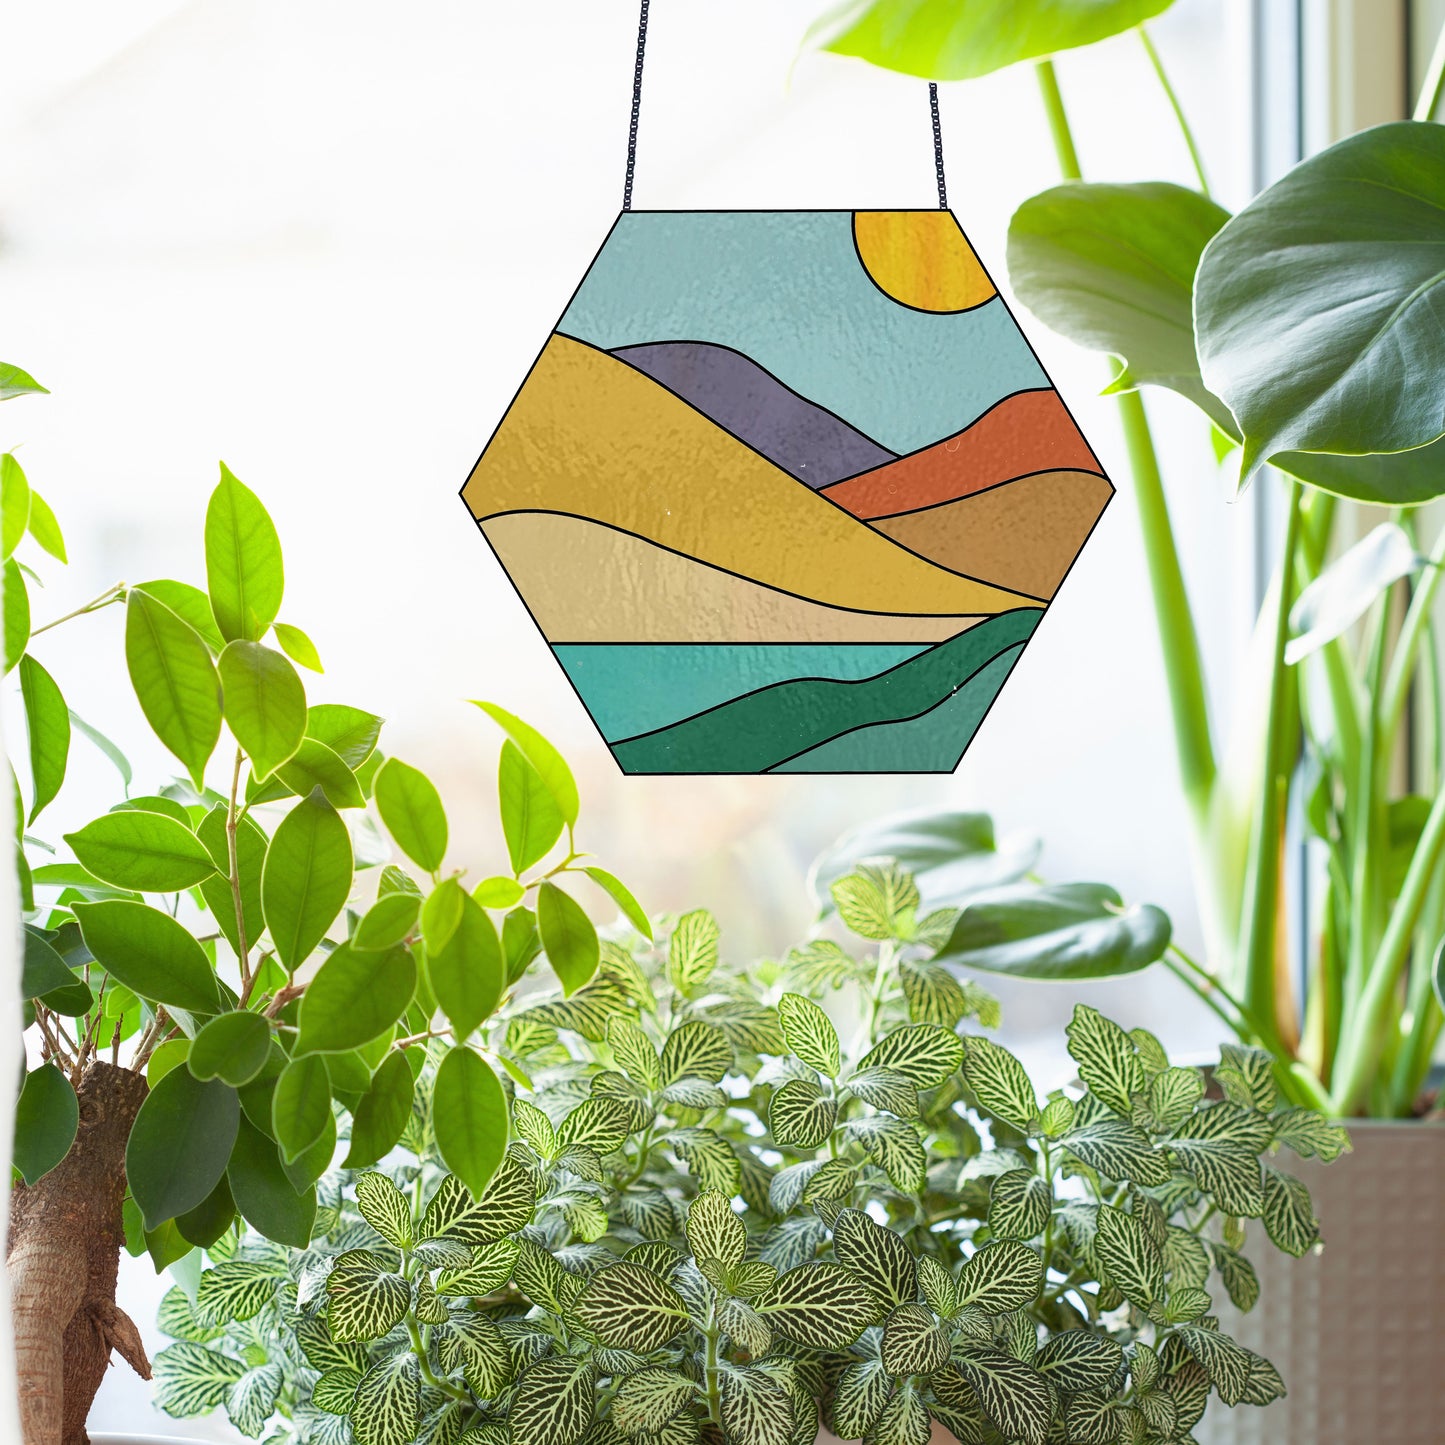 Stained glass pattern for a boho landscape hexagon, instant PDF download, shown in a window with sun and plants